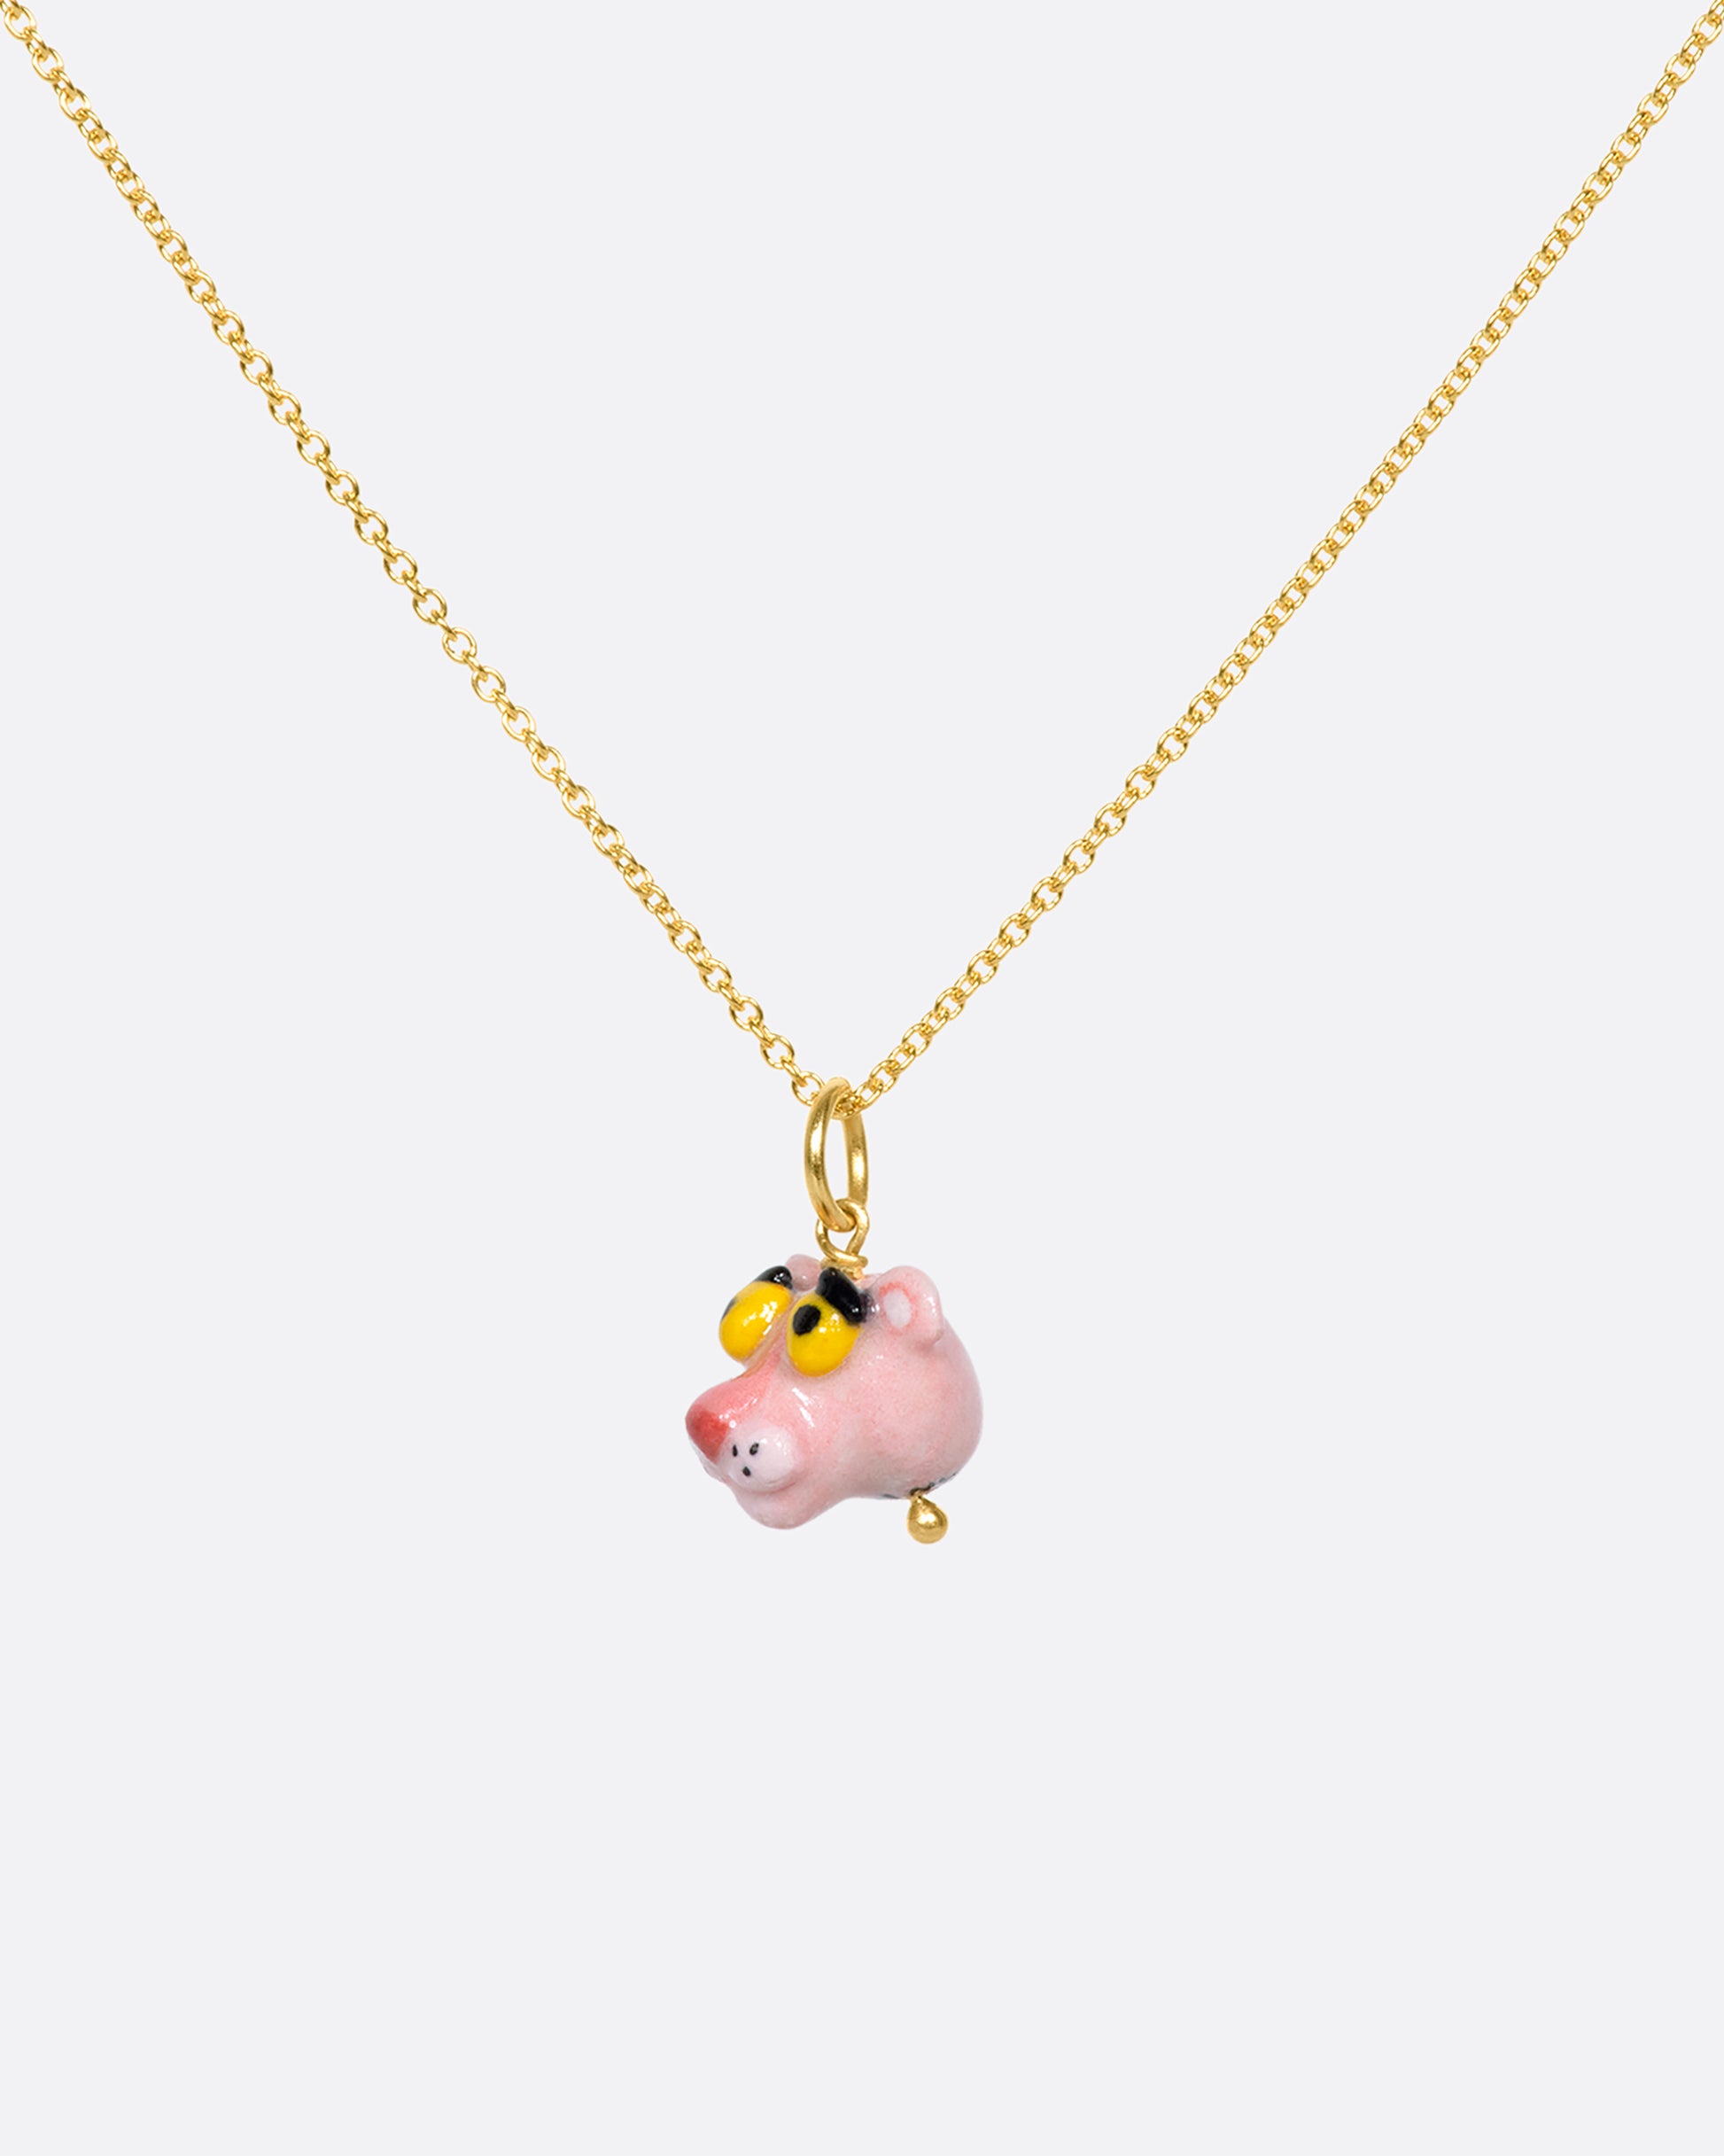 A handmade and painted porcelain Pink Panther charm with a 14k gold bail